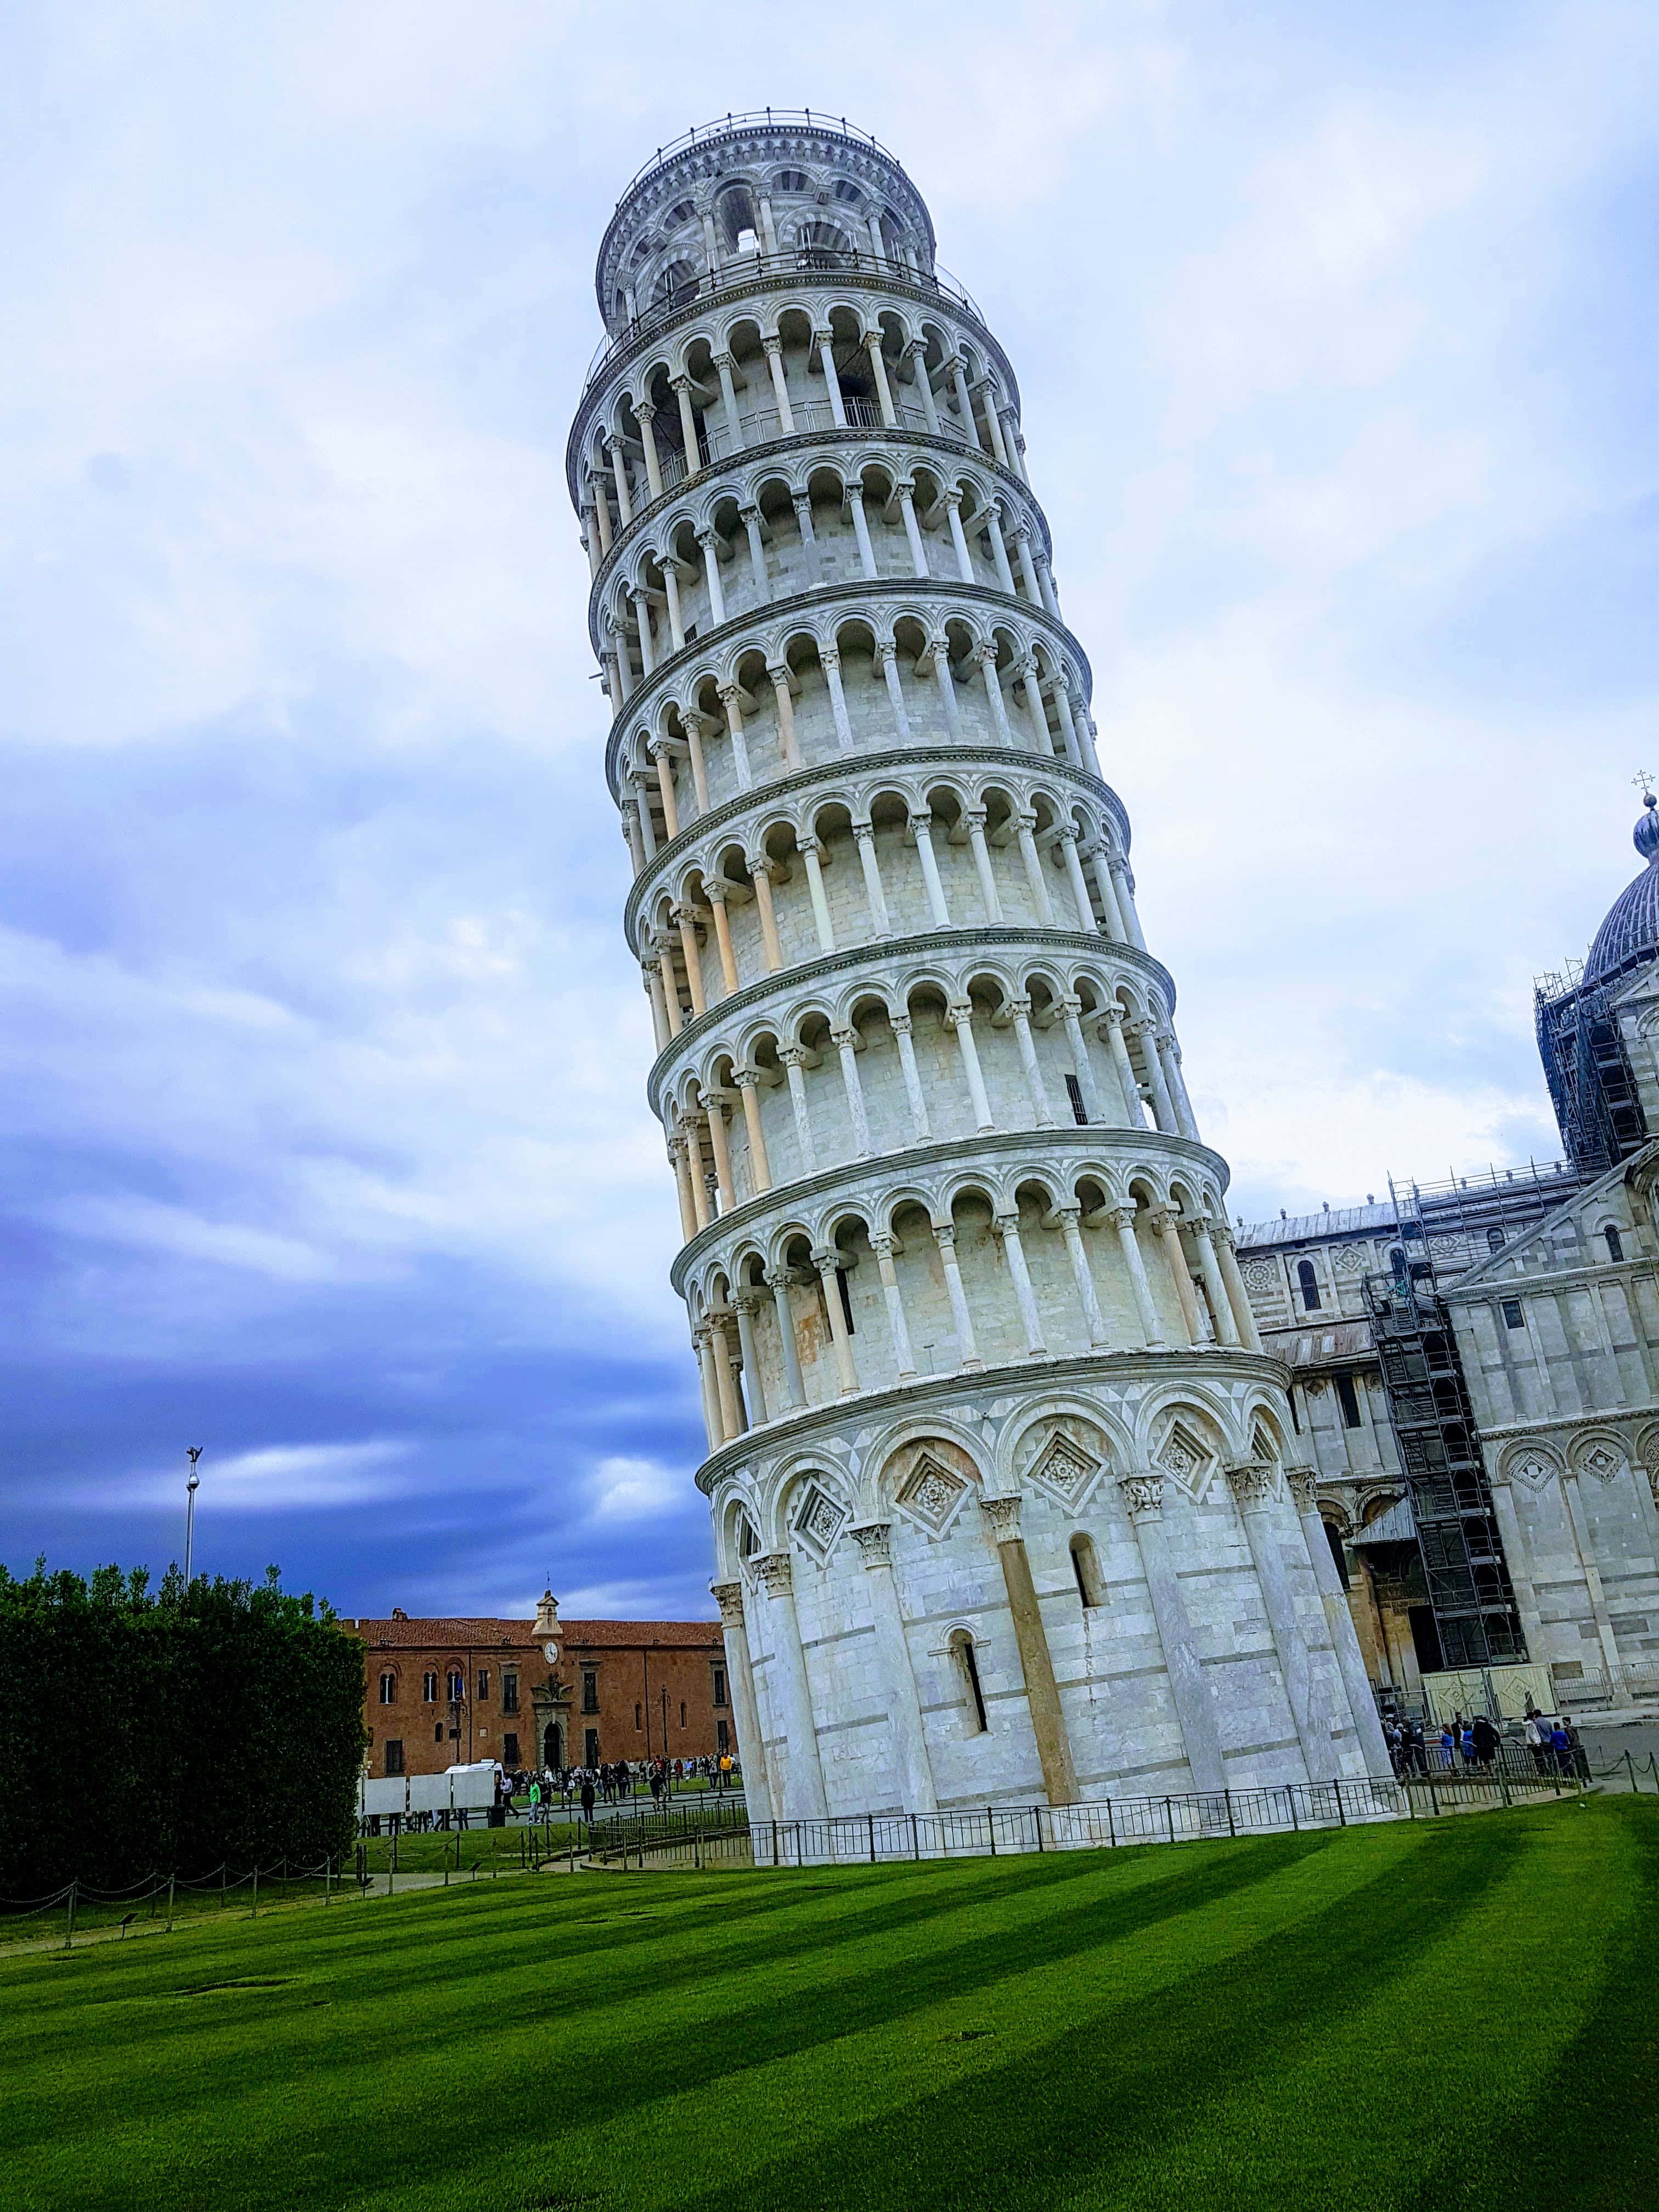 how tall and wide s the leaning tower of pizza